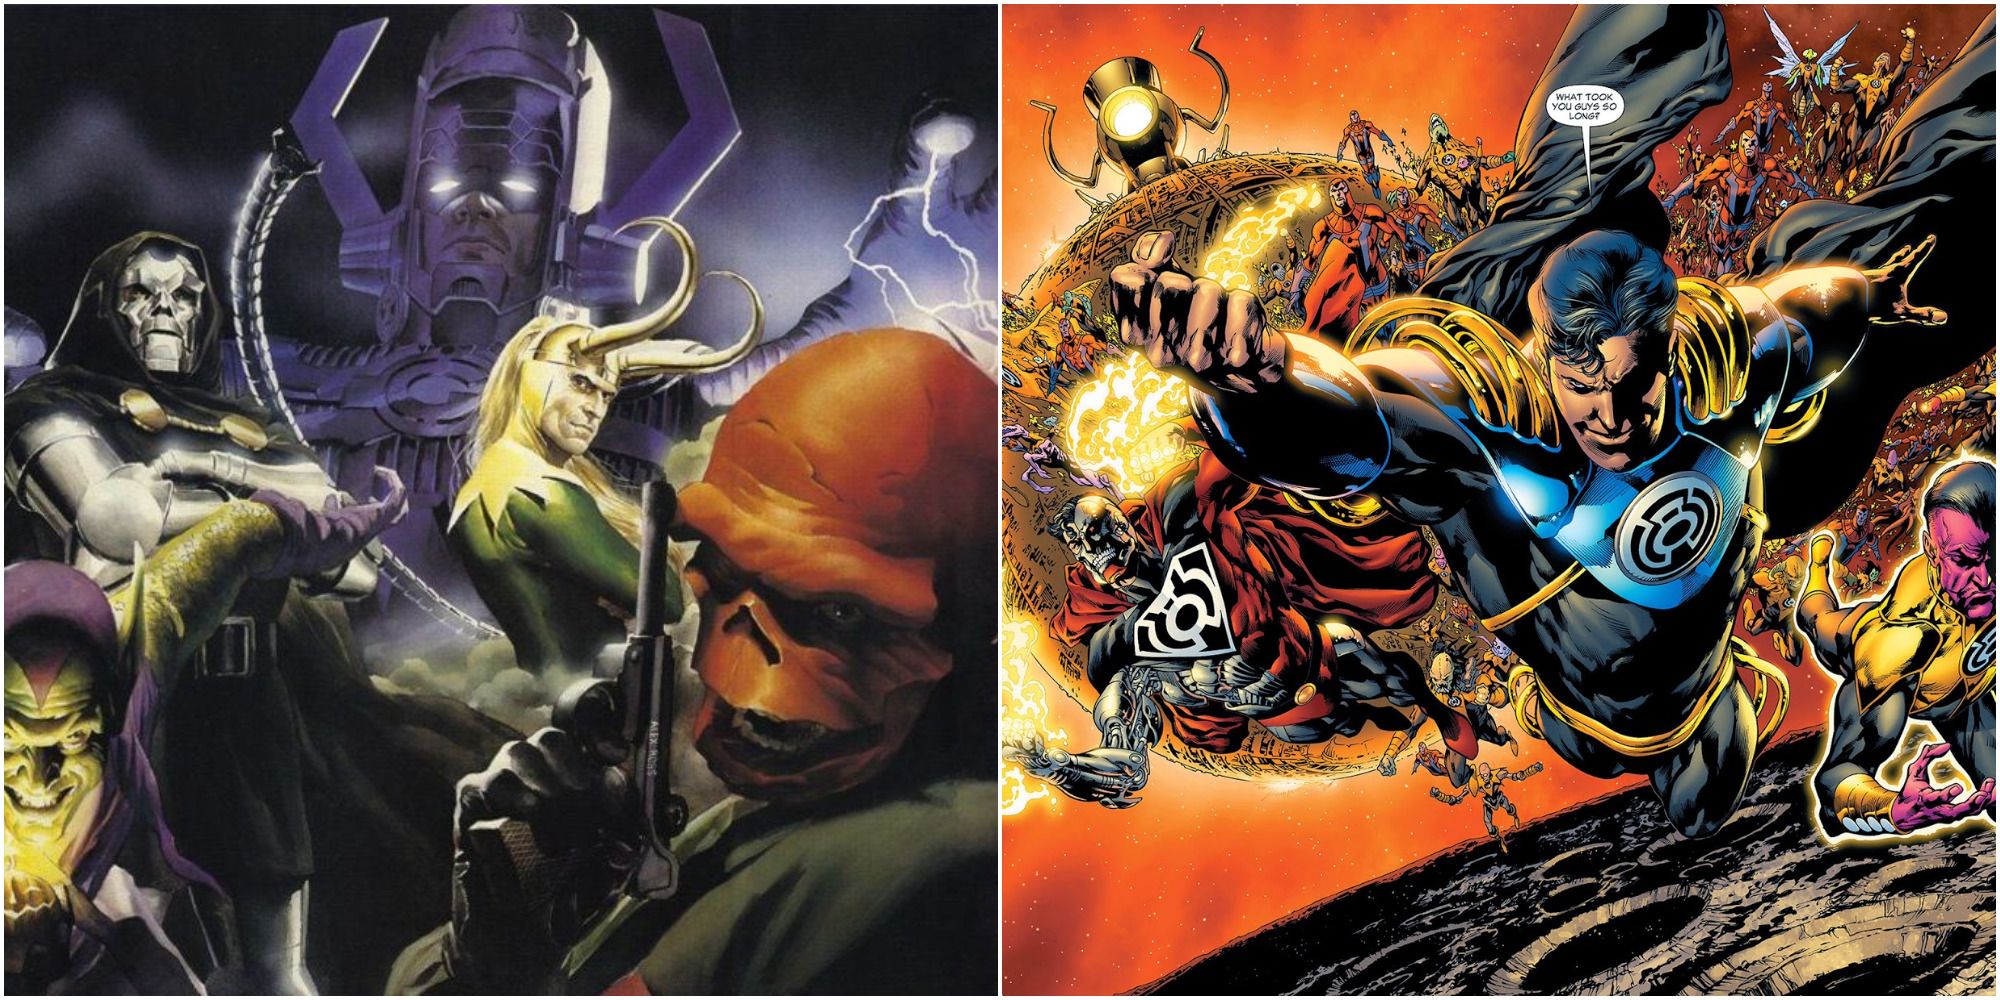 Marvel Villains and the Sinestro Corps